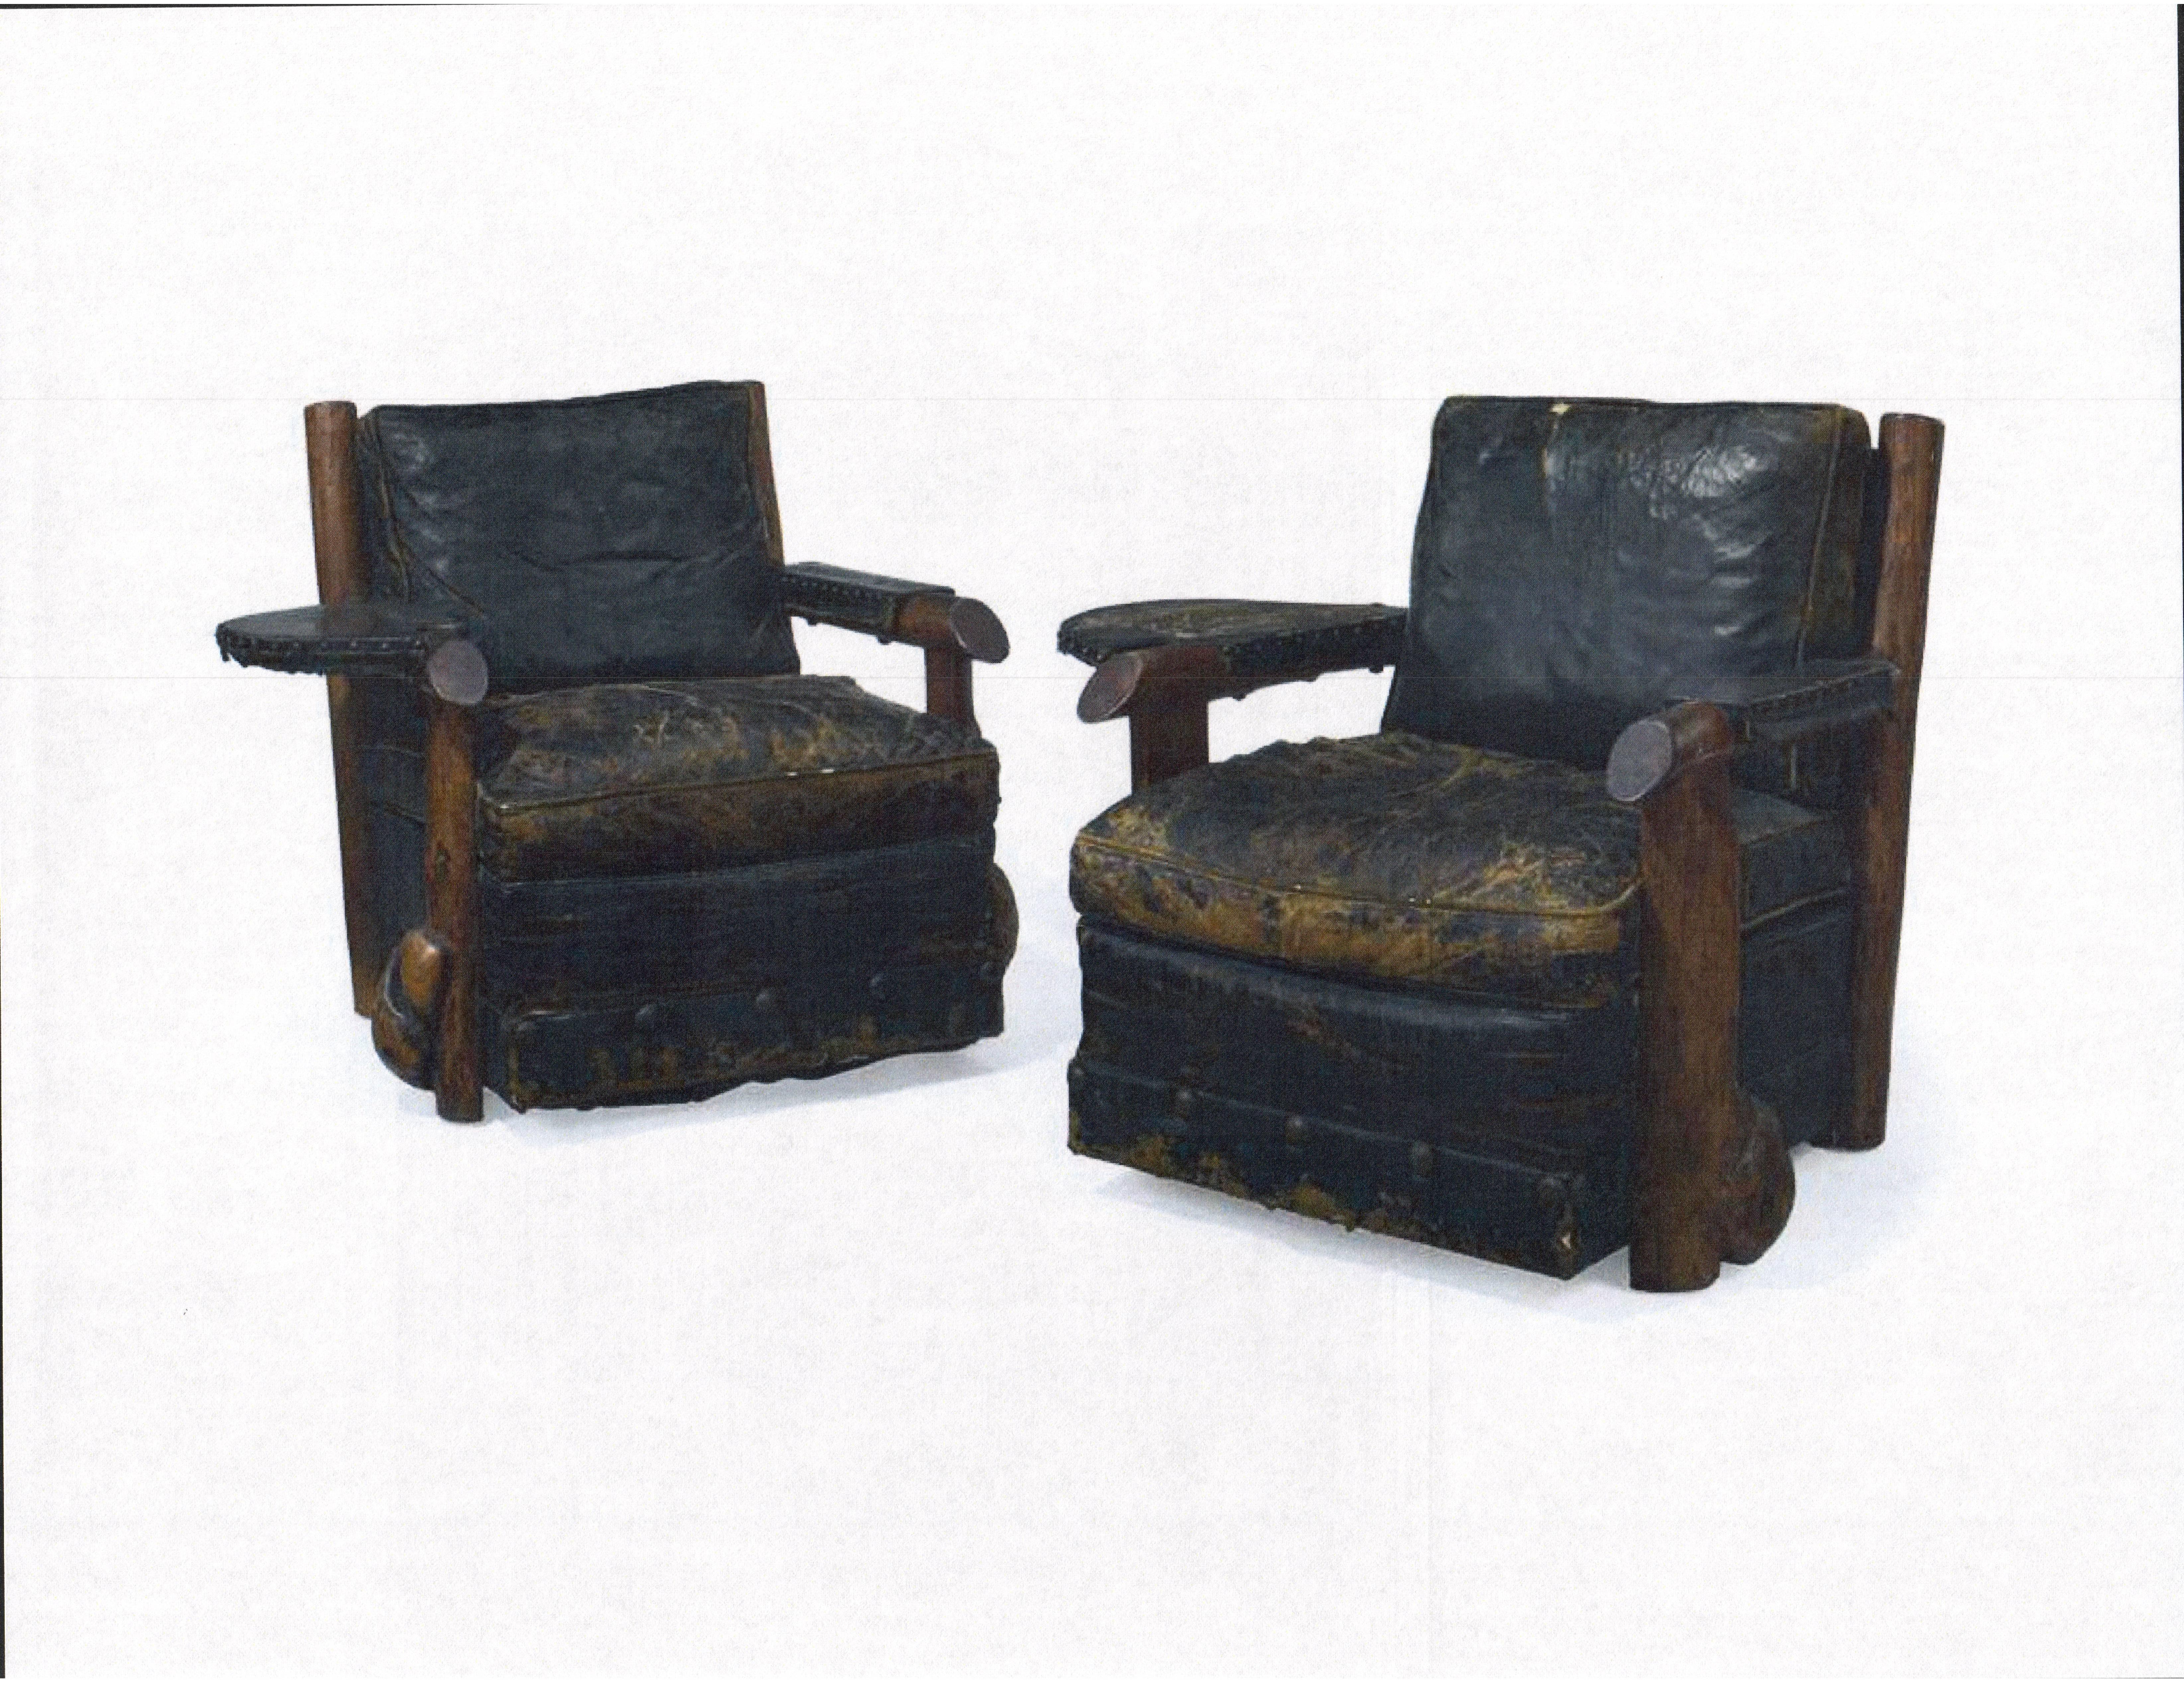 Pair of leather and fir club chairs and matching sofa of leather and fir. Made by Thomas C. Molesworth, circa 1945. The set retains its original dark green leather upholstery and estate condition finish.